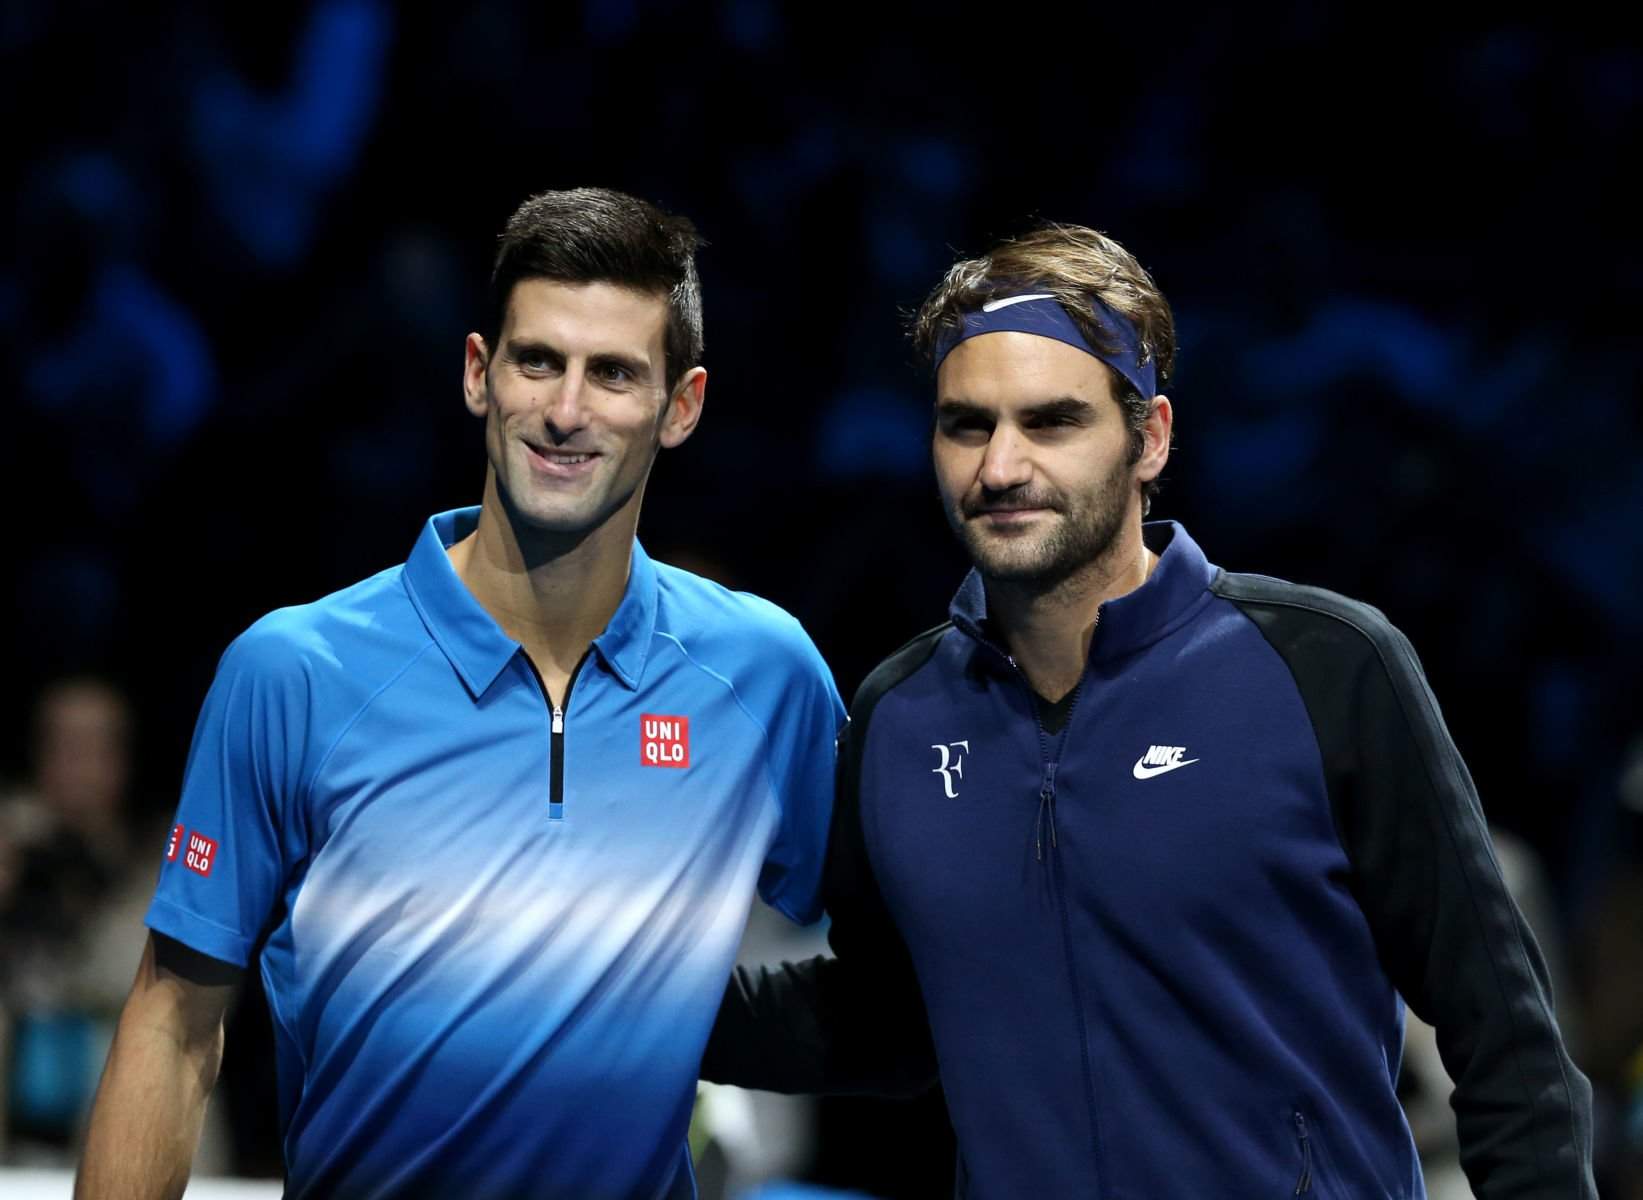 LONDON, NOV. 23, 2015 Novak Djokovic (L) of Serbia and Roger Federer of Switzerland pose ahead of the men's single's final at the ATP World Tour Finals at the O2 Arena in London, Britain, Nov. 22, 2015. Djokovic won 2-0. (Credit Image: © Han Yan/Xinhua via ZUMA Wire) FOT. ZUMA/NEWSPIX.PL POLAND ONLY! --- Newspix.pl *** Local Caption *** www.newspix.pl mail us: info@newspix.pl call us: 0048 022 23 22 222 --- Polish Picture Agency by Ringier Axel Springer Poland